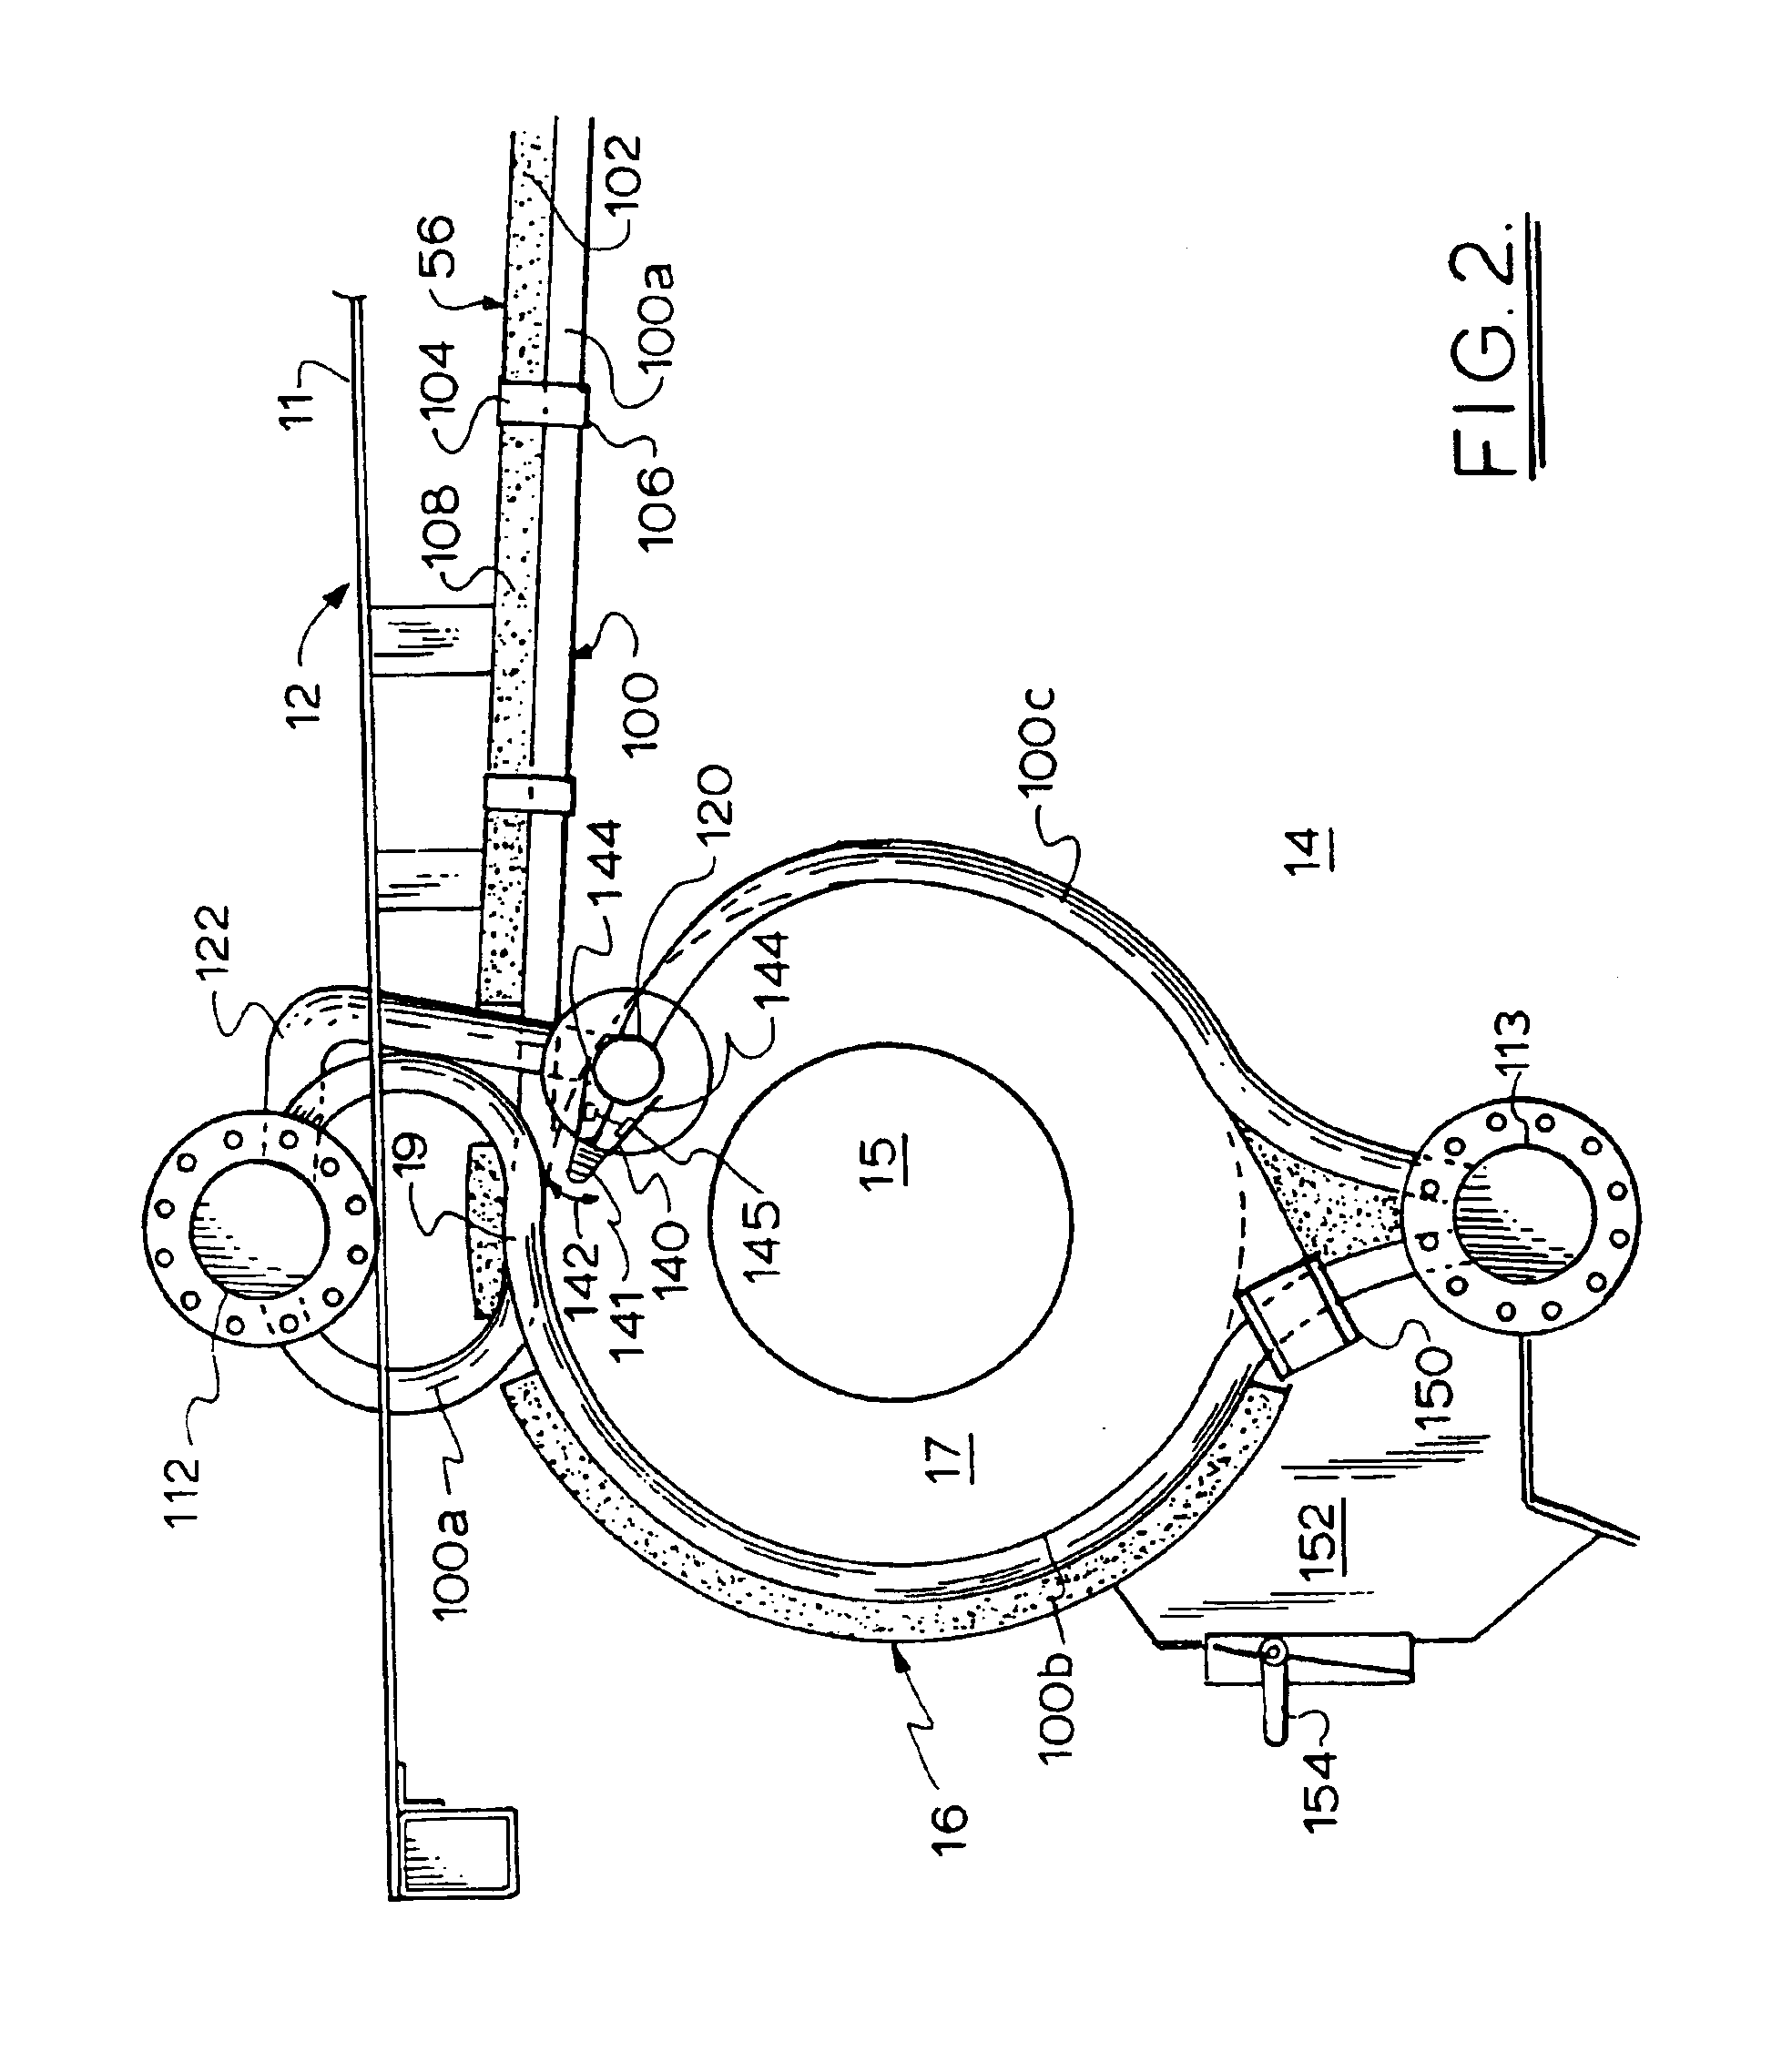 Refractory wall structure and damper device